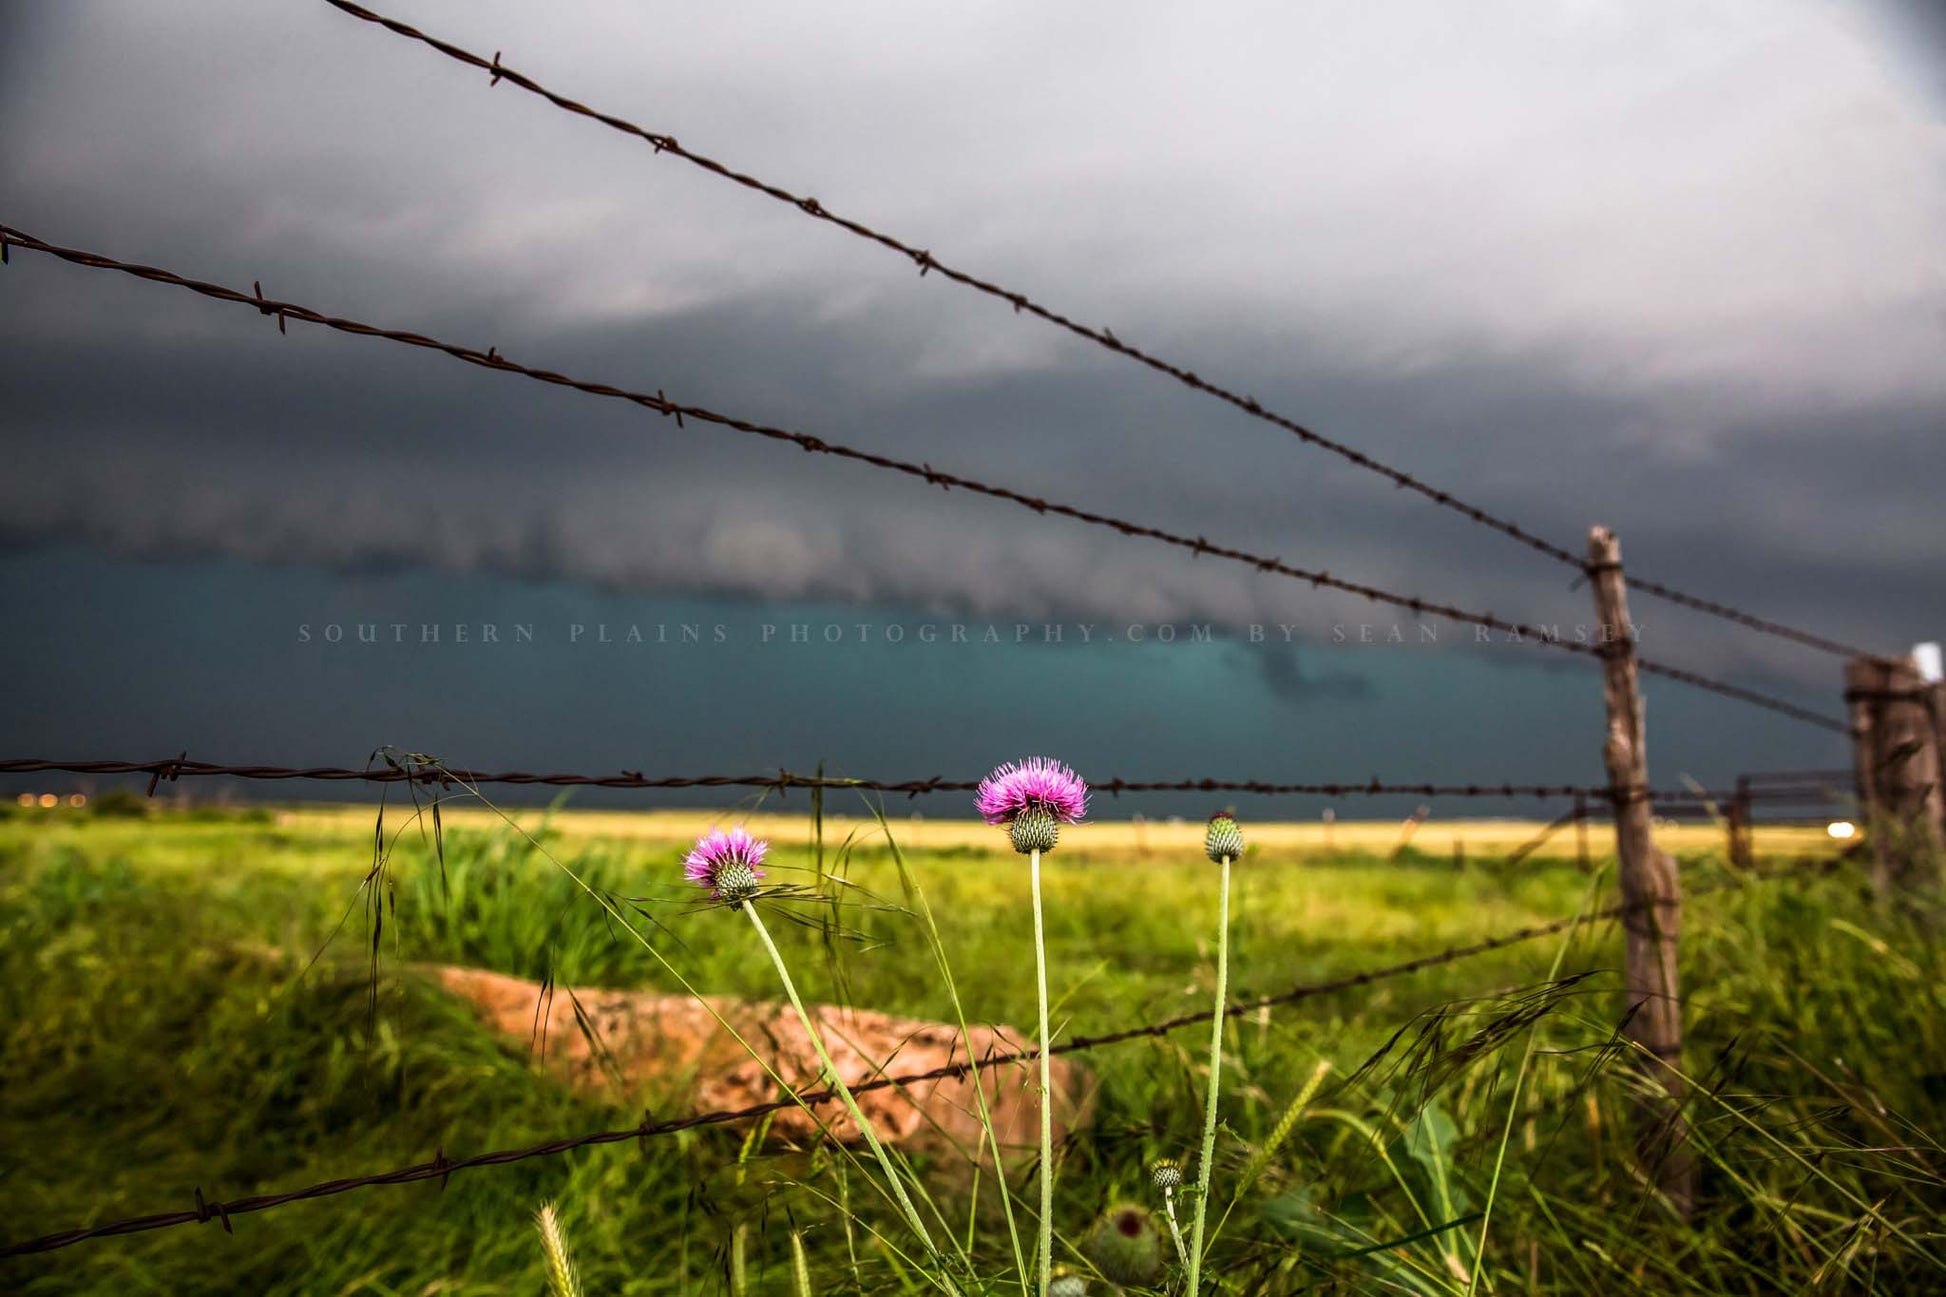 Country photography print of pink thistle wildflowers along a barbed wire fence as a storm approaches on a stormy spring day in Texas by Sean Ramsey of Southern Plains Photography.